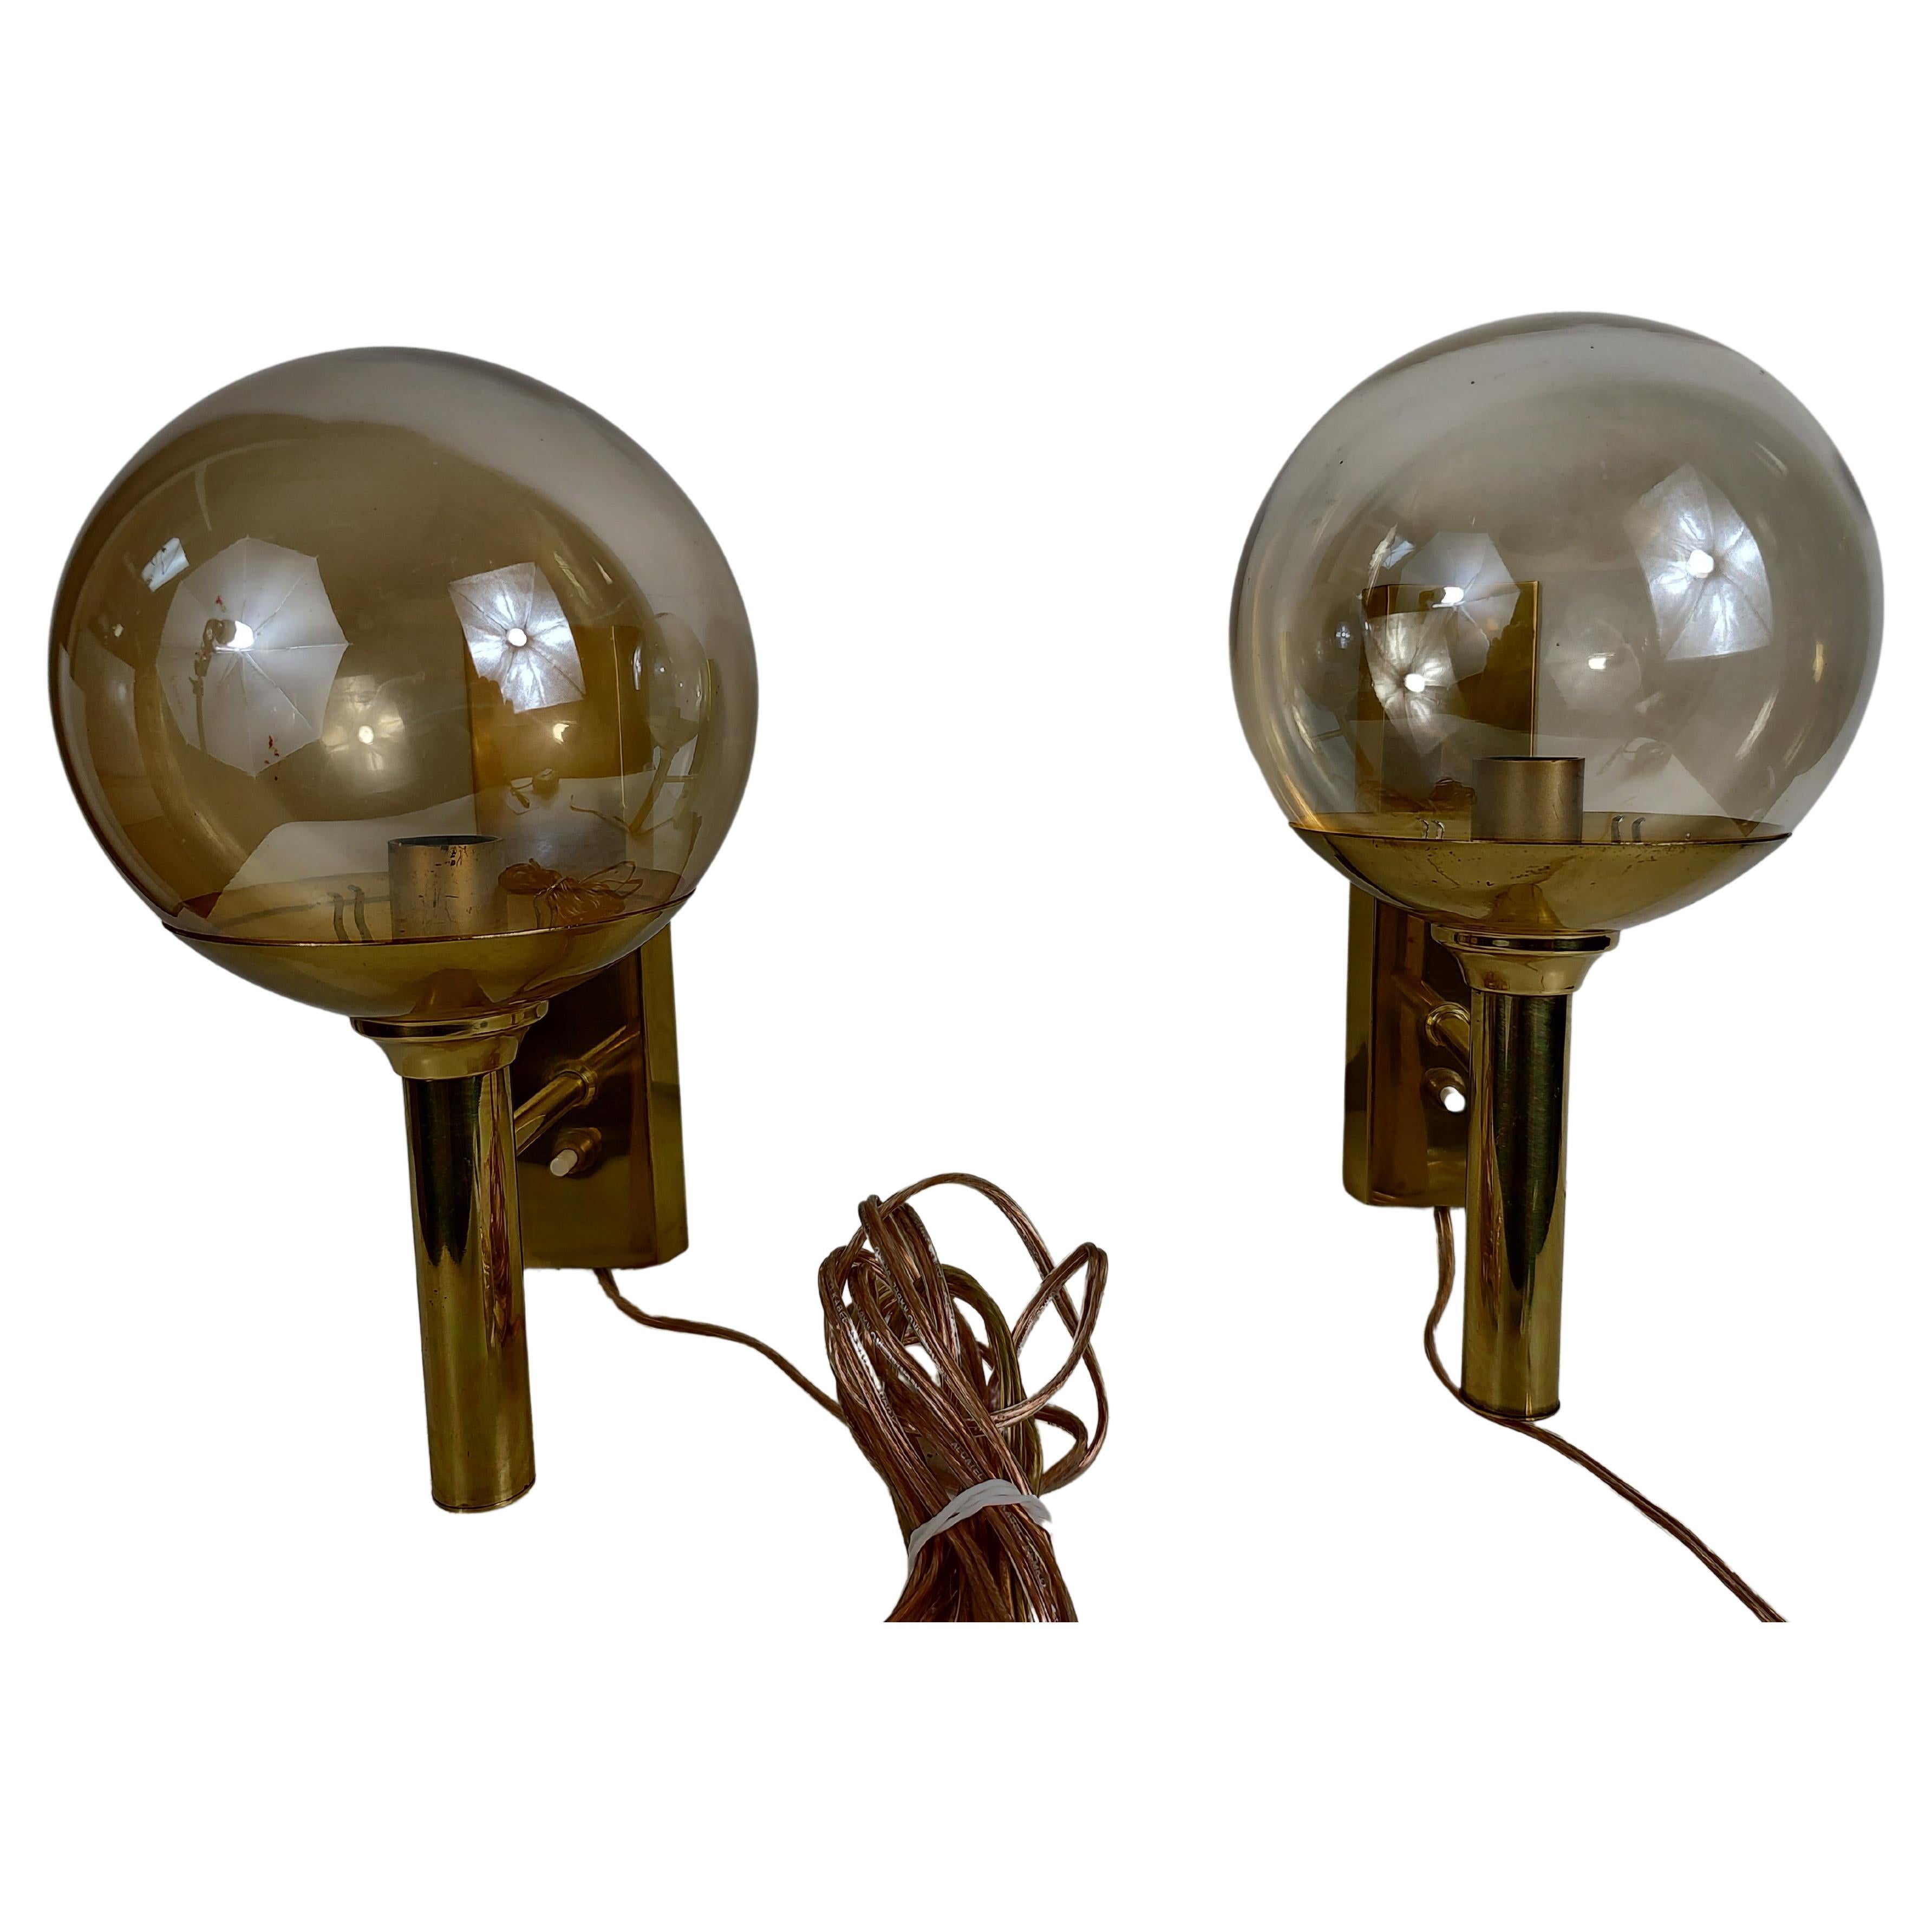 Norwegian Mid-Century Modern Wall Sconces Brass with Blown Glass Shades by Sv. Mejlstrom For Sale